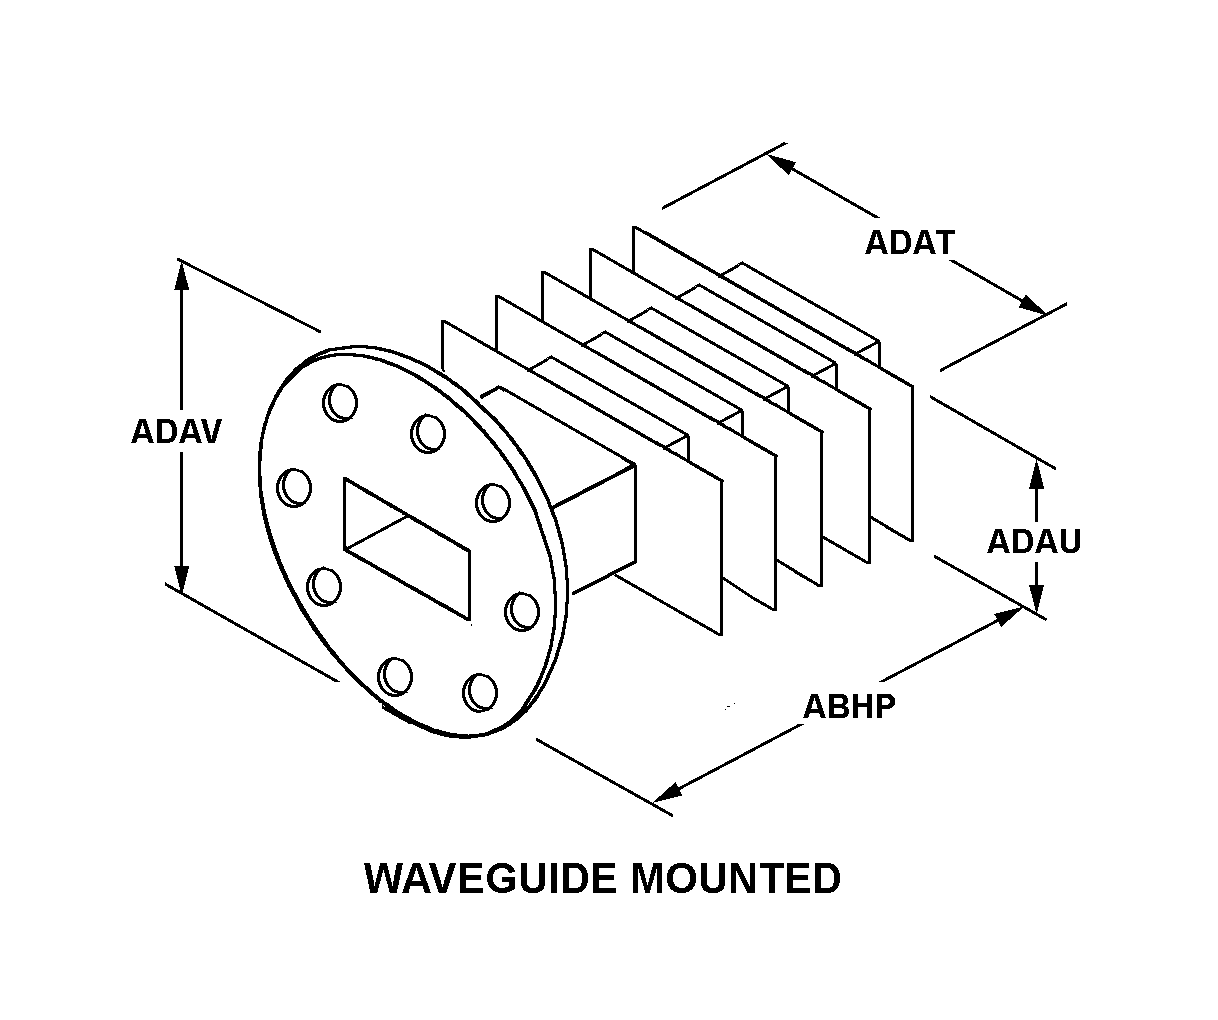 WAVEGUIDE MOUNTED style nsn 5985-01-013-6195